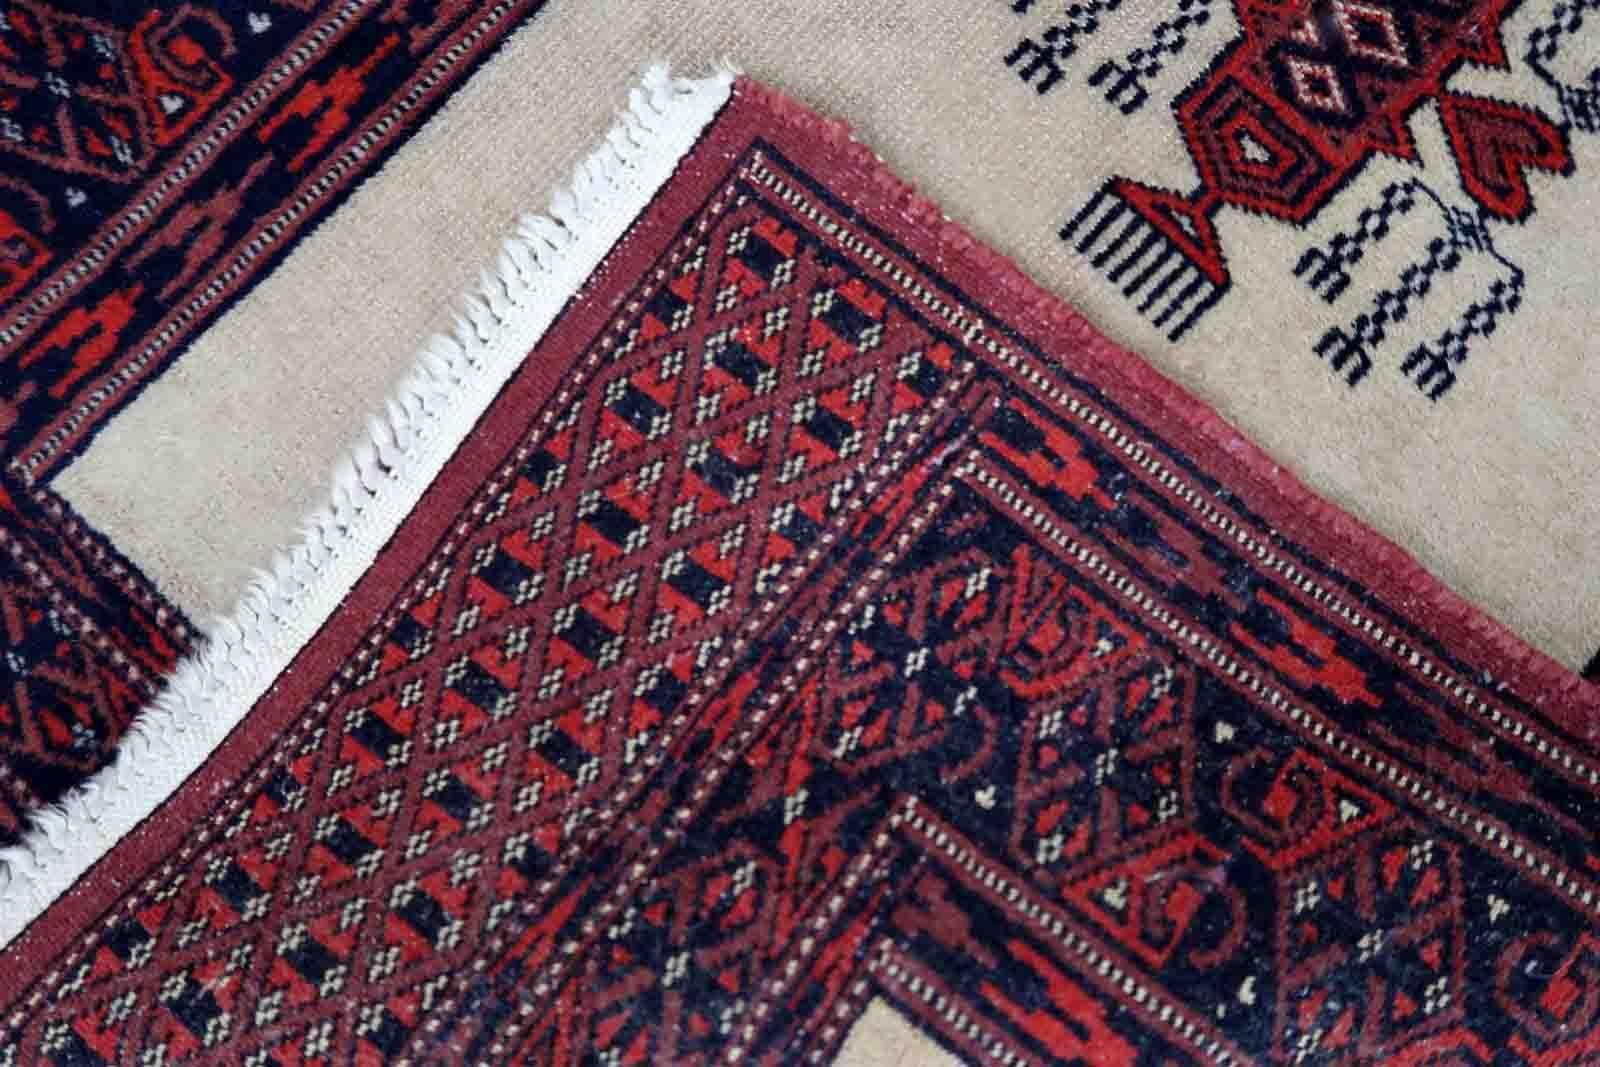 Handmade vintage Uzbek Bukhara runner in traditional design. The rug is from the end of 20th century made in wool.

-condition: original, some age wear,

-circa: 1960s,

-size: 2' x 6.2' (61cm x 190cm),
?
-material: wool,

-country of